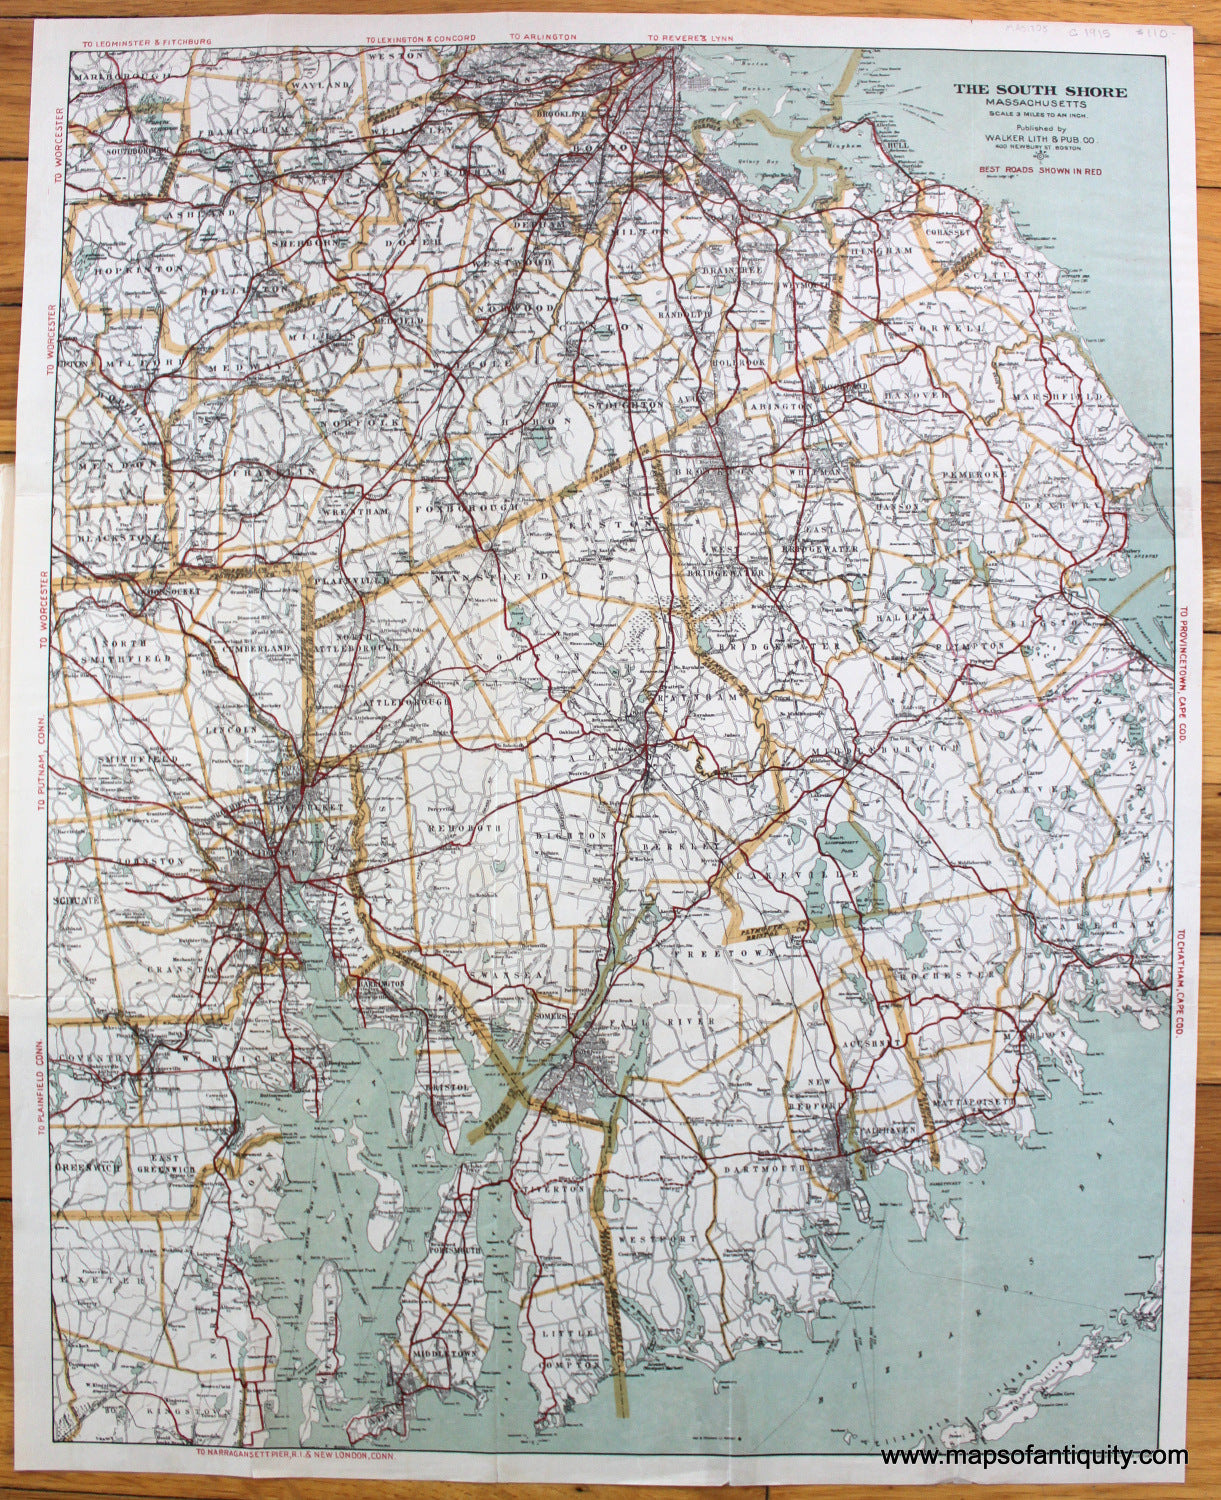 Antique-Printed-Color-Road-Map-Road-Map-of-the-South-Shore-and-part-of-Norfolk-County-Massachusetts-United-States-Massachusetts-c.-1915-Walker-Maps-Of-Antiquity